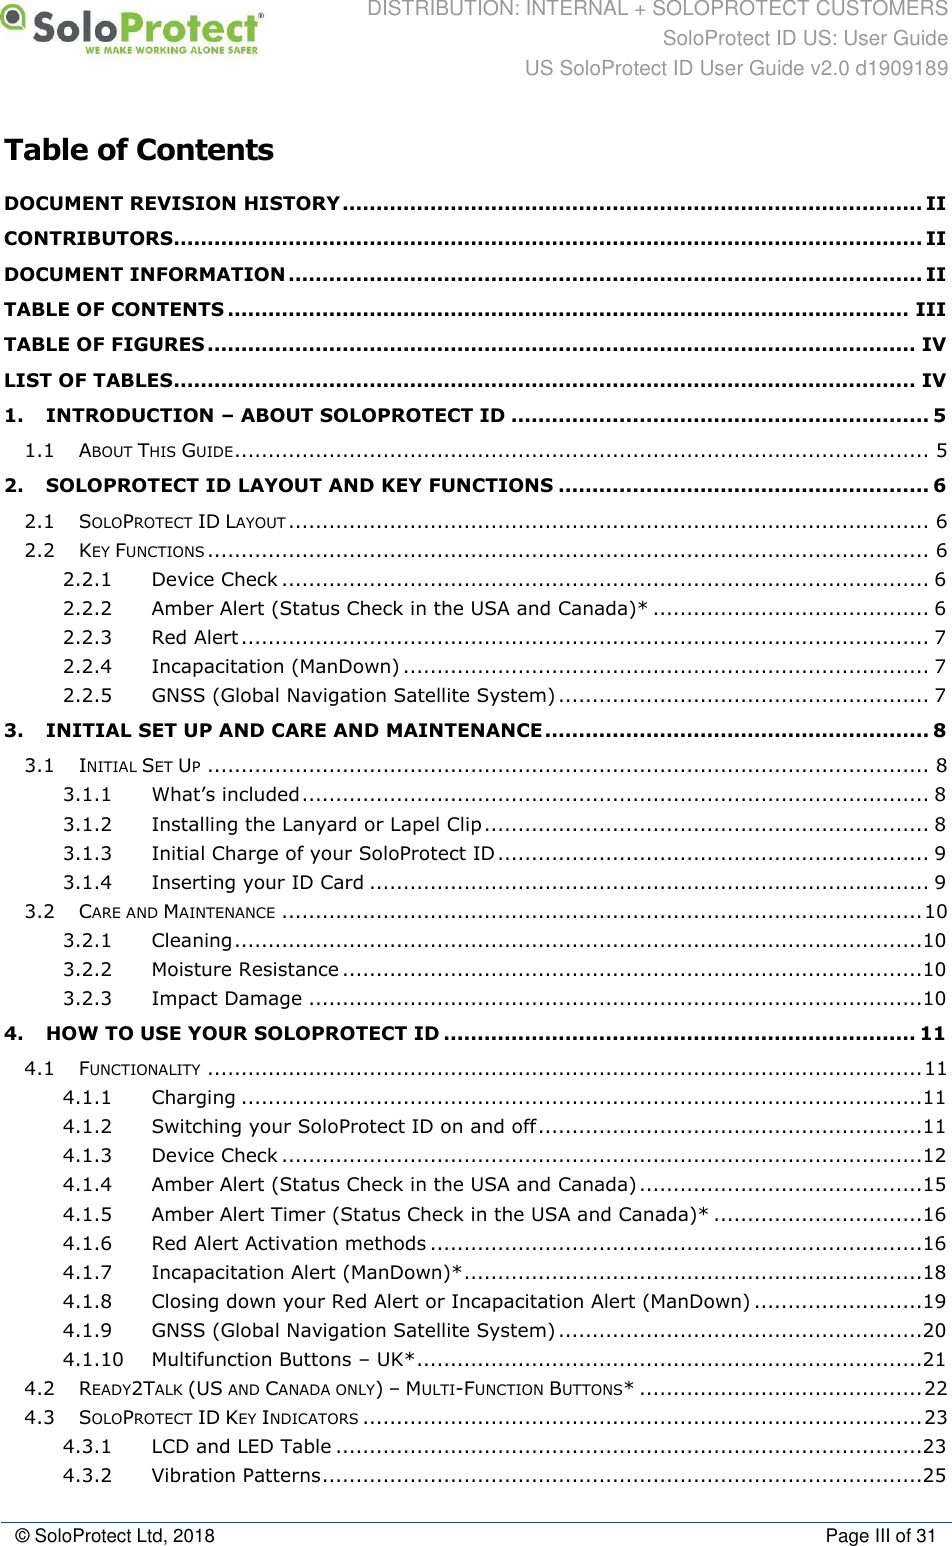 DISTRIBUTION: INTERNAL + SOLOPROTECT CUSTOMERS SoloProtect ID US: User Guide US SoloProtect ID User Guide v2.0 d1909189  © SoloProtect Ltd, 2018  Page III of 31 Table of Contents DOCUMENT REVISION HISTORY ...................................................................................... II CONTRIBUTORS ............................................................................................................... II DOCUMENT INFORMATION .............................................................................................. II TABLE OF CONTENTS ..................................................................................................... III TABLE OF FIGURES ......................................................................................................... IV LIST OF TABLES .............................................................................................................. IV 1. INTRODUCTION – ABOUT SOLOPROTECT ID .............................................................. 5 1.1 ABOUT THIS GUIDE ....................................................................................................... 5 2. SOLOPROTECT ID LAYOUT AND KEY FUNCTIONS ....................................................... 6 2.1 SOLOPROTECT ID LAYOUT ............................................................................................... 6 2.2 KEY FUNCTIONS ........................................................................................................... 6 2.2.1 Device Check ................................................................................................ 6 2.2.2 Amber Alert (Status Check in the USA and Canada)* ......................................... 6 2.2.3 Red Alert ...................................................................................................... 7 2.2.4 Incapacitation (ManDown) .............................................................................. 7 2.2.5 GNSS (Global Navigation Satellite System) ....................................................... 7 3. INITIAL SET UP AND CARE AND MAINTENANCE ......................................................... 8 3.1 INITIAL SET UP ........................................................................................................... 8 3.1.1 What’s included ............................................................................................. 8 3.1.2 Installing the Lanyard or Lapel Clip .................................................................. 8 3.1.3 Initial Charge of your SoloProtect ID ................................................................ 9 3.1.4 Inserting your ID Card ................................................................................... 9 3.2 CARE AND MAINTENANCE ............................................................................................... 10 3.2.1 Cleaning ......................................................................................................10 3.2.2 Moisture Resistance ......................................................................................10 3.2.3 Impact Damage ...........................................................................................10 4. HOW TO USE YOUR SOLOPROTECT ID ...................................................................... 11 4.1 FUNCTIONALITY .......................................................................................................... 11 4.1.1 Charging .....................................................................................................11 4.1.2 Switching your SoloProtect ID on and off .........................................................11 4.1.3 Device Check ...............................................................................................12 4.1.4 Amber Alert (Status Check in the USA and Canada) ..........................................15 4.1.5 Amber Alert Timer (Status Check in the USA and Canada)* ...............................16 4.1.6 Red Alert Activation methods .........................................................................16 4.1.7 Incapacitation Alert (ManDown)* ....................................................................18 4.1.8 Closing down your Red Alert or Incapacitation Alert (ManDown) .........................19 4.1.9 GNSS (Global Navigation Satellite System) ......................................................20 4.1.10 Multifunction Buttons – UK* ...........................................................................21 4.2 READY2TALK (US AND CANADA ONLY) – MULTI-FUNCTION BUTTONS* .......................................... 22 4.3 SOLOPROTECT ID KEY INDICATORS ................................................................................... 23 4.3.1 LCD and LED Table .......................................................................................23 4.3.2 Vibration Patterns .........................................................................................25 